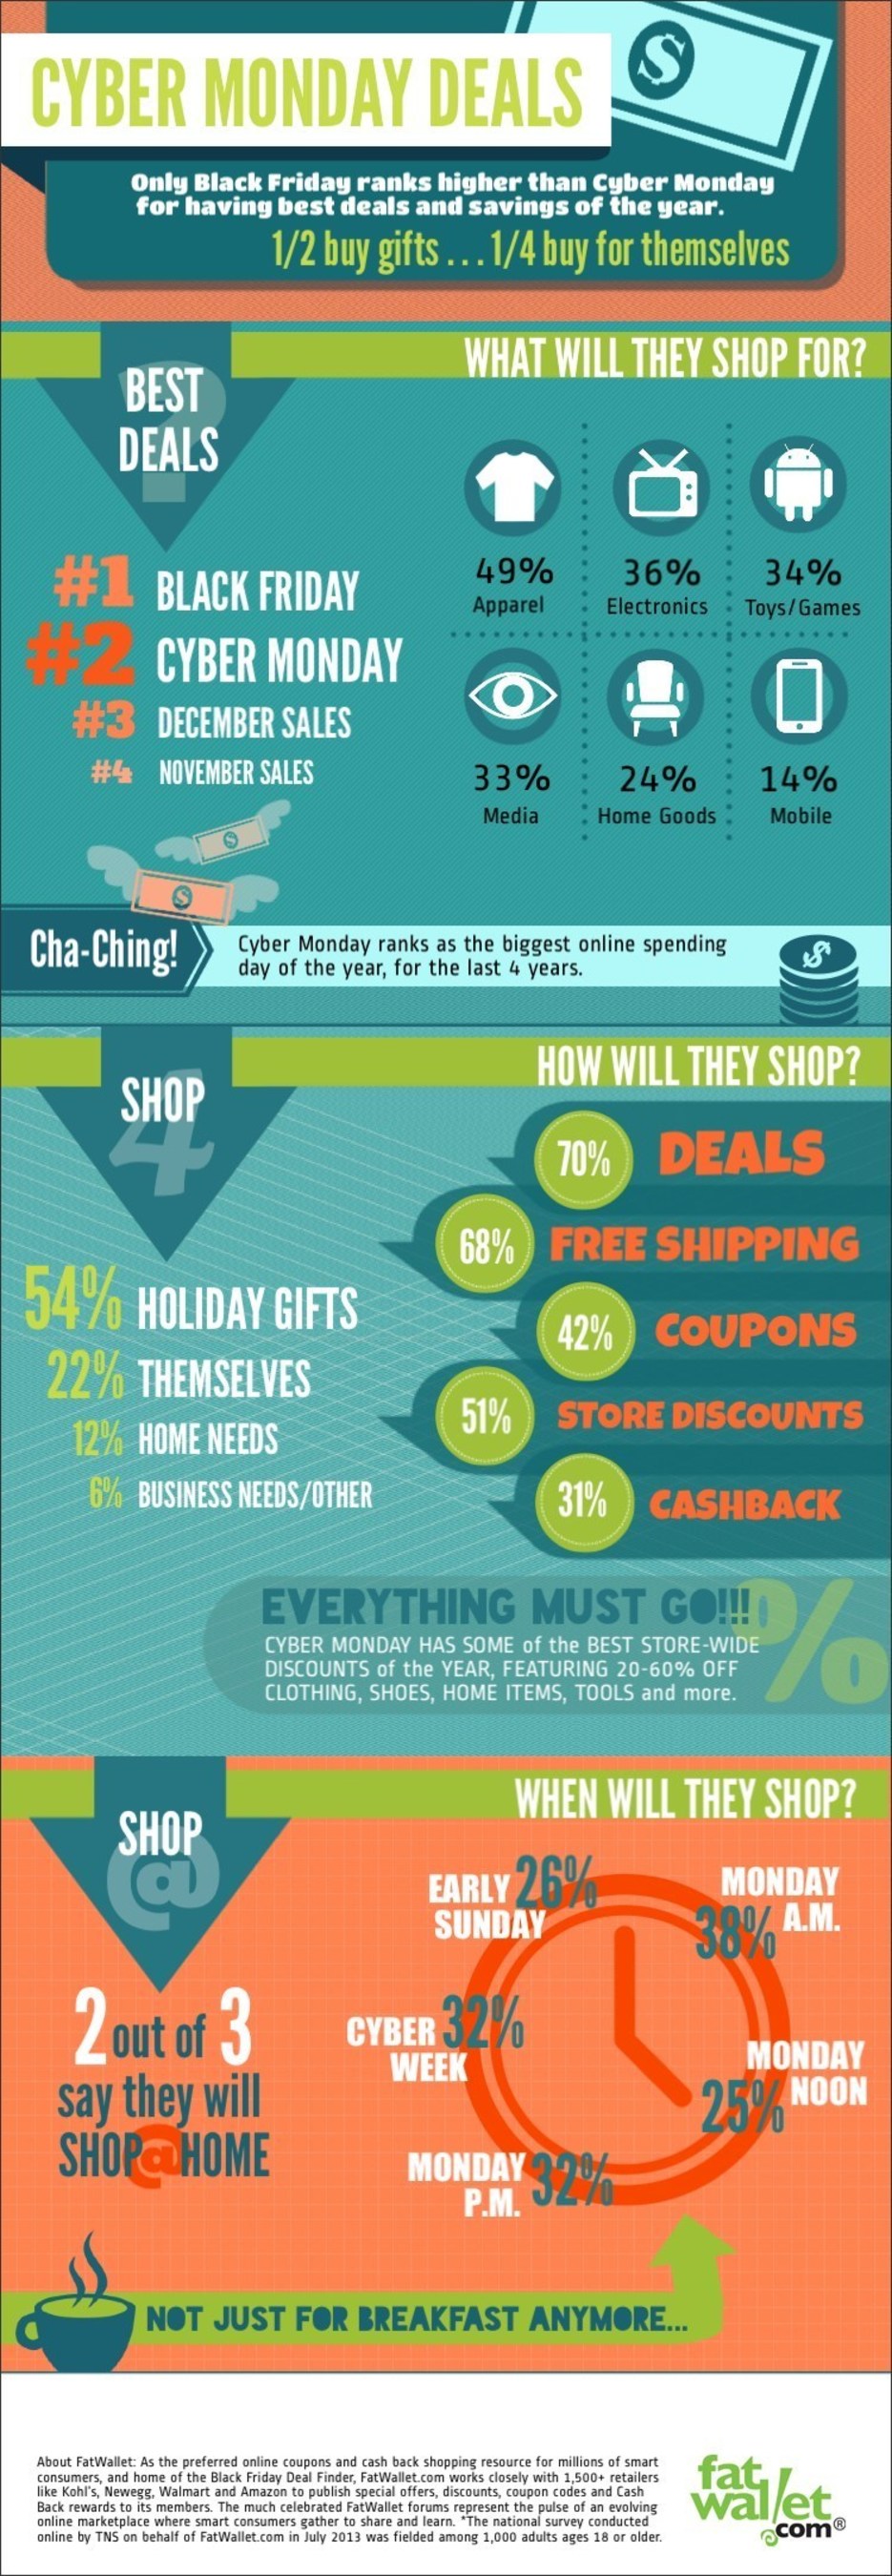 INFOGRAPHIC: 1 in 4 will start shopping for Cyber Monday deals on Sunday this year.